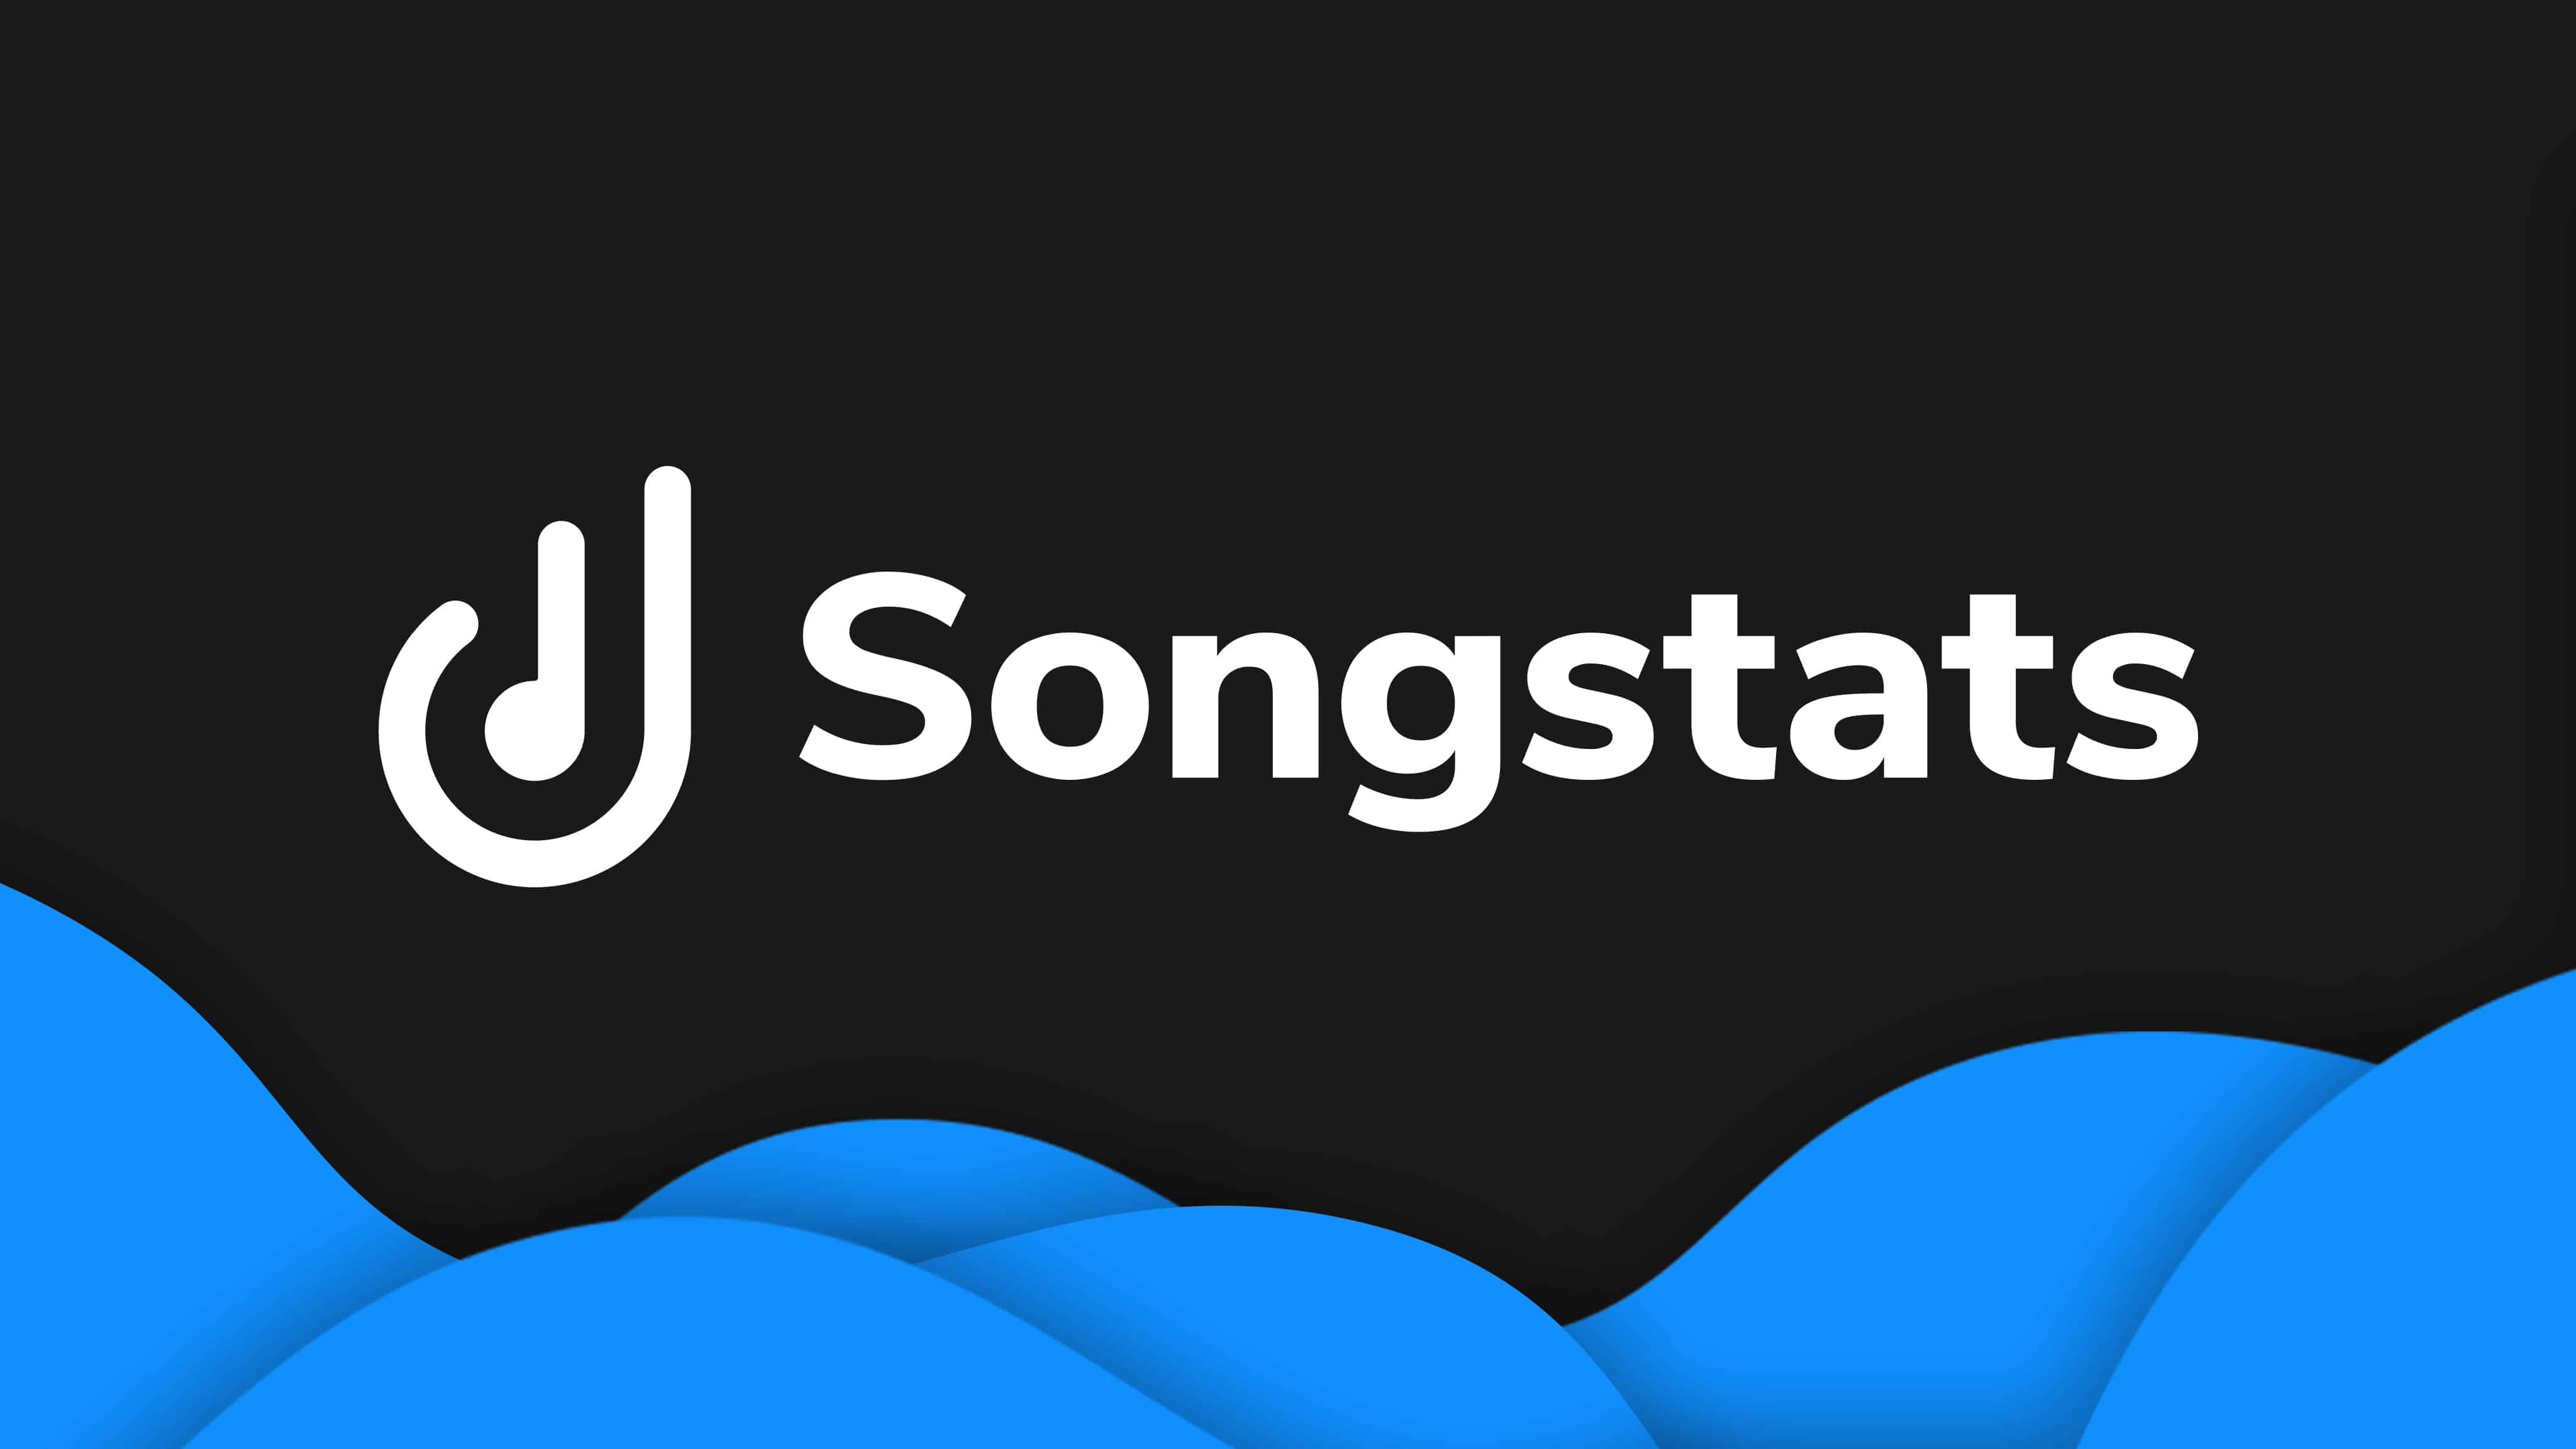 Songstats The New Music Analytics App From 1001tracklists 1001tracklists.com is tracked by us since april, 2011. music analytics app from 1001tracklists